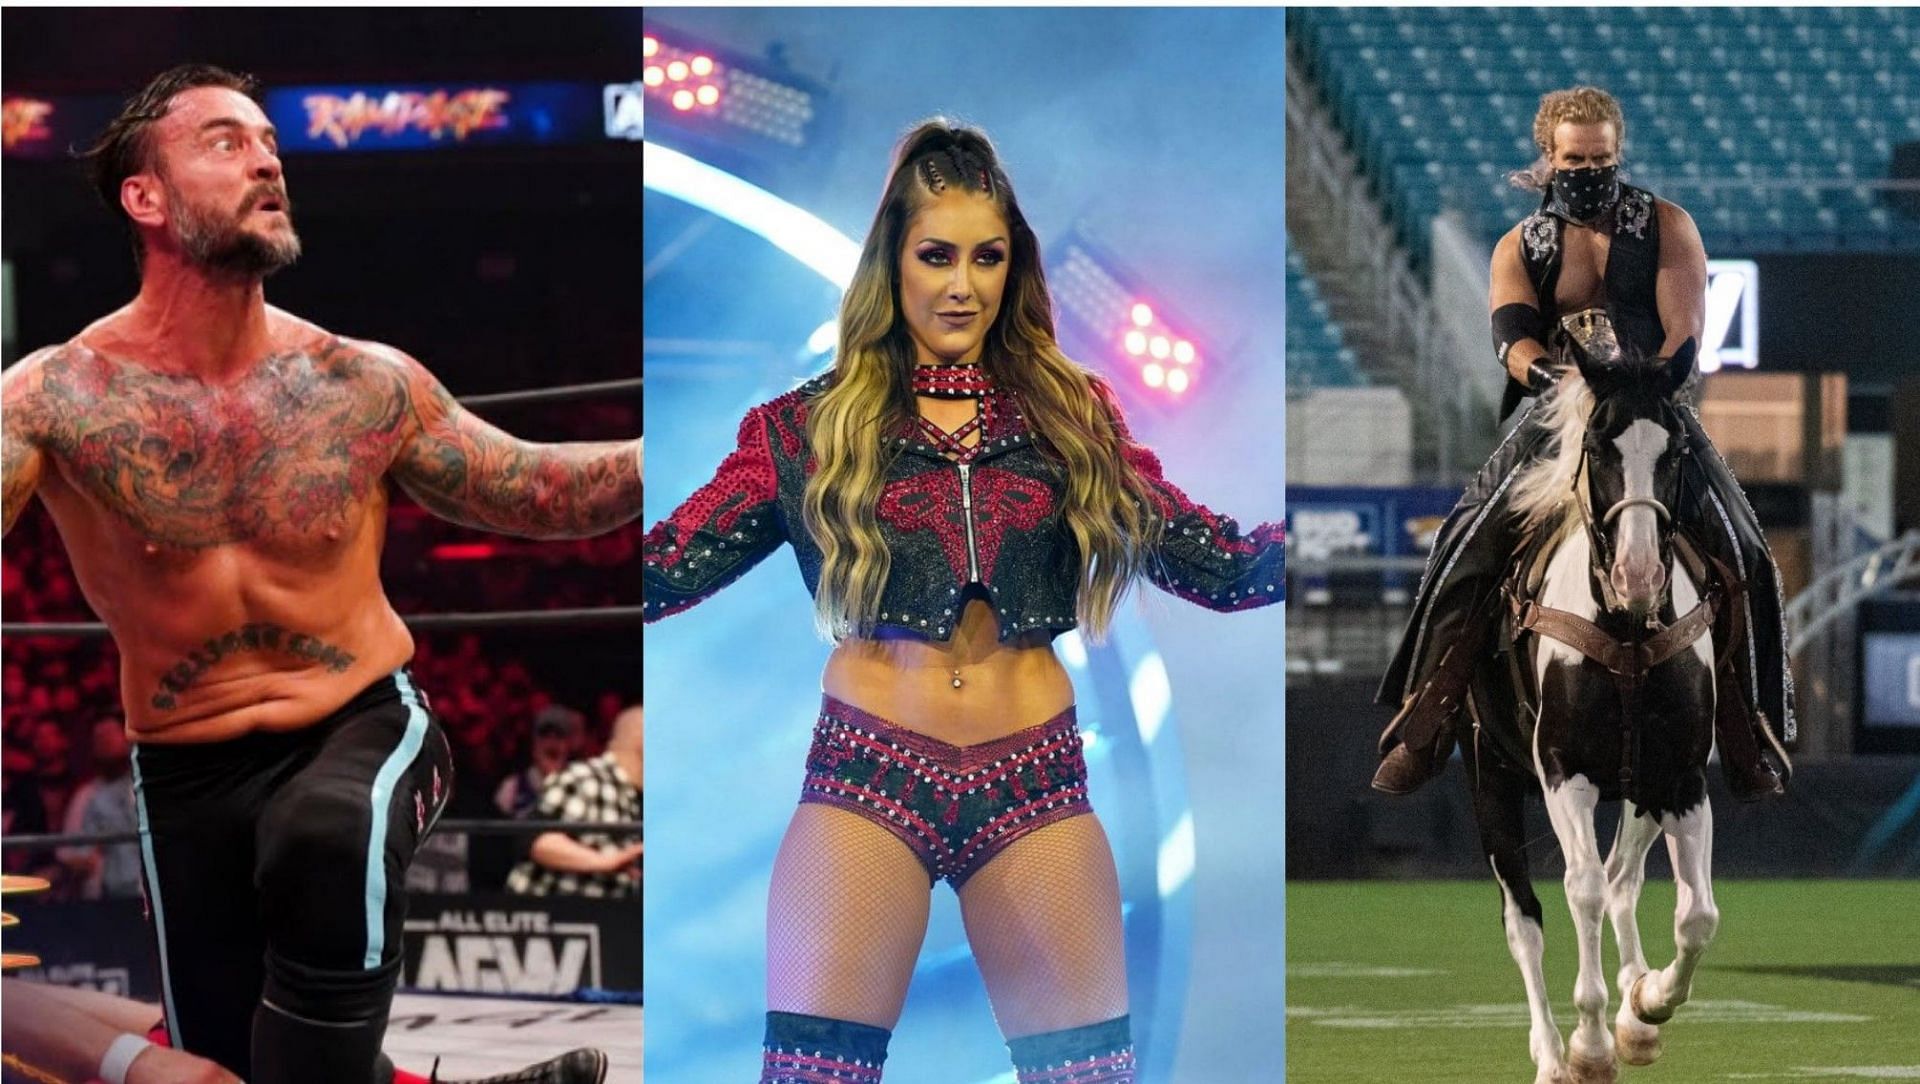 Who will emerge star of the night at AEW Full Gear?